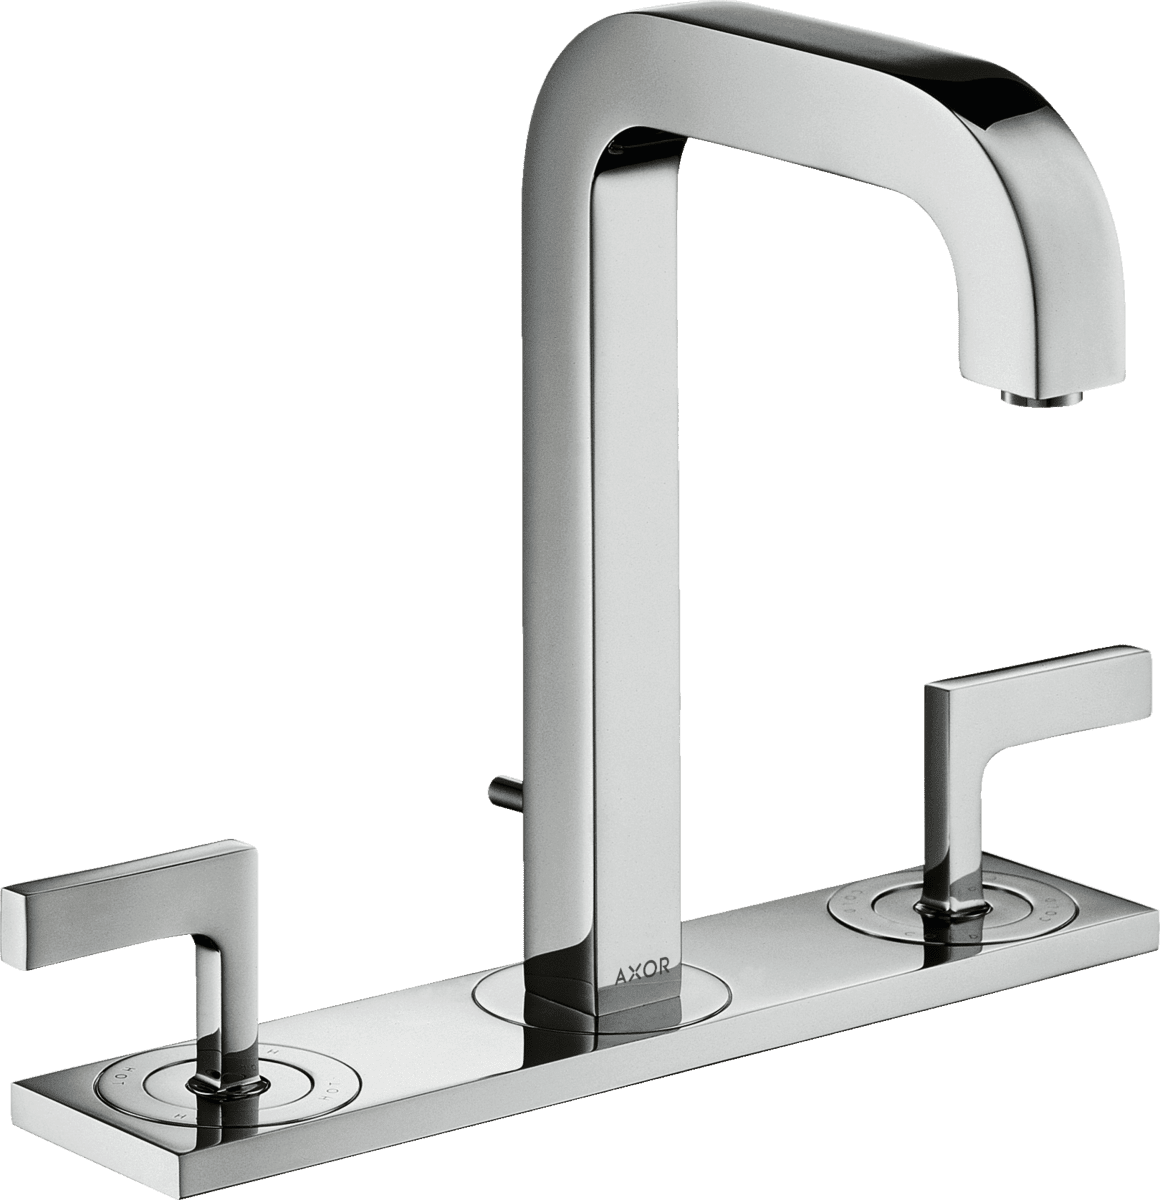 Picture of HANSGROHE AXOR Citterio 3-hole basin mixer 170 with spout 140 mm, lever handles, plate and pop-up waste set #39136000 - Chrome